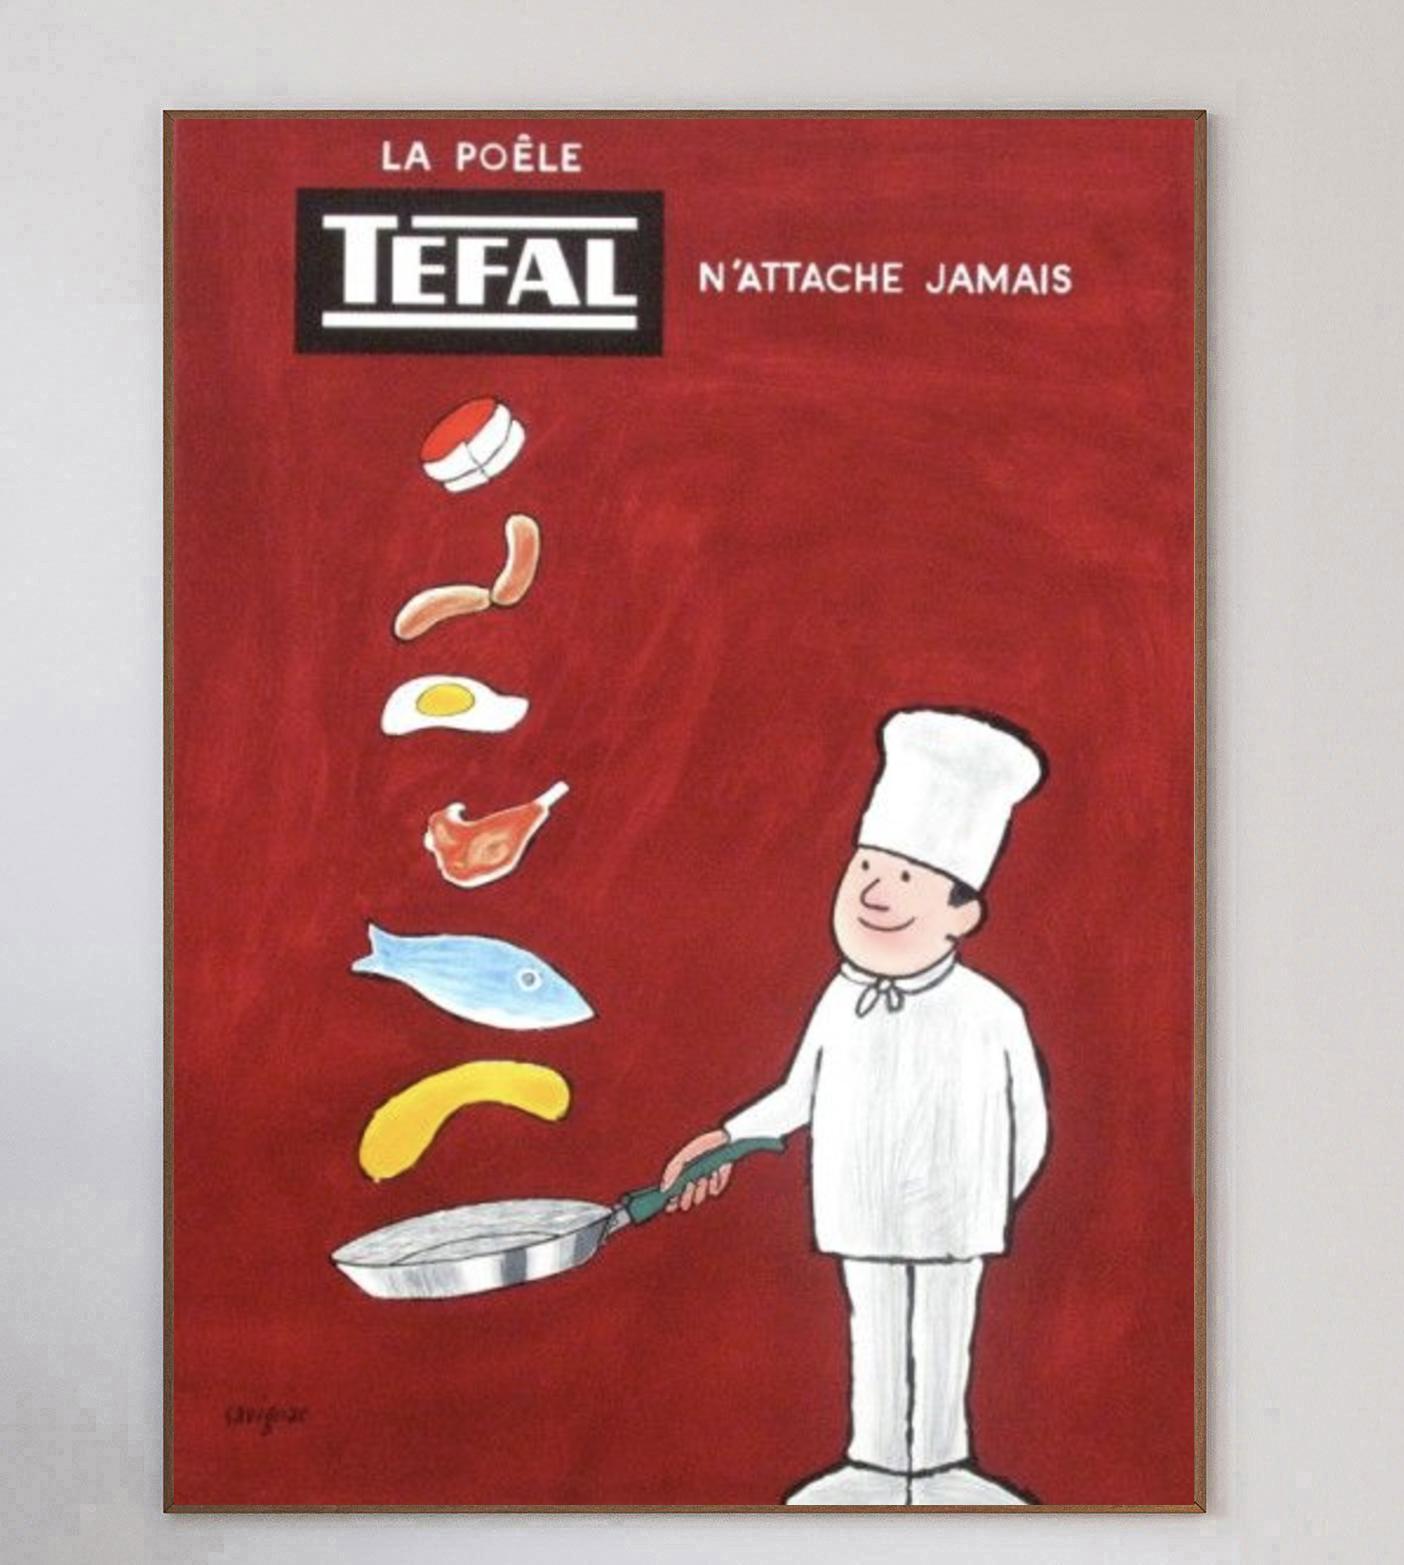 Stunning poster produced for Tefal, the French cookware manufacturer featuring artwork by the great French poster artist Raymond Savignac. Founded in 1956, Tefal continues to this day and are best known for their cooking pots & pans.

Depicting a